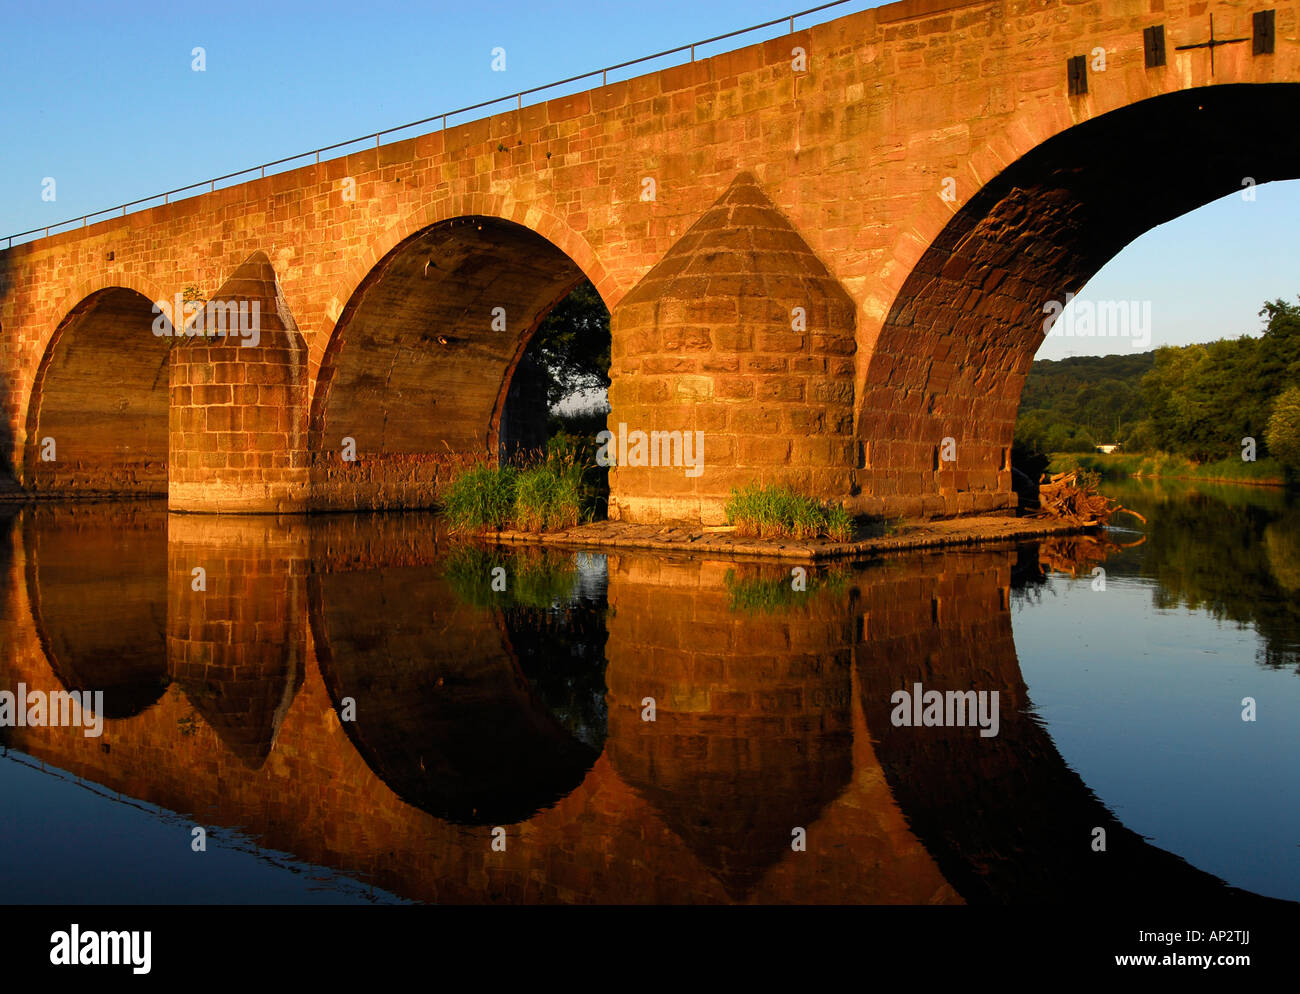 Bridge over river Werra, former border between GDR and FRG, Thuringia, Germany Stock Photo